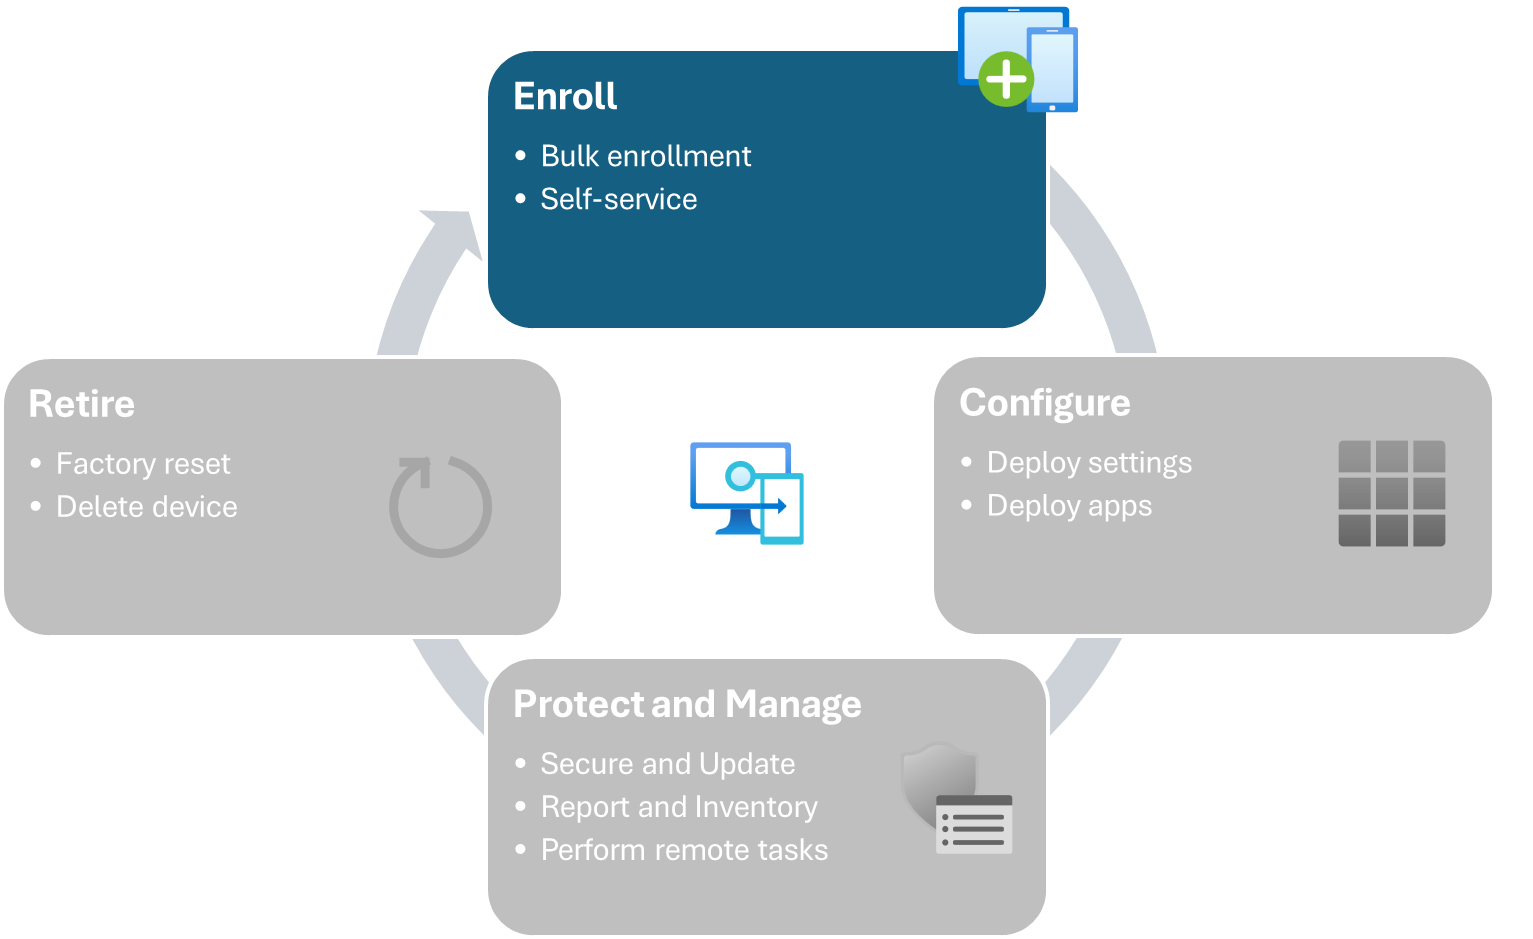 The device lifecycle for Intune-managed devices - enrollment